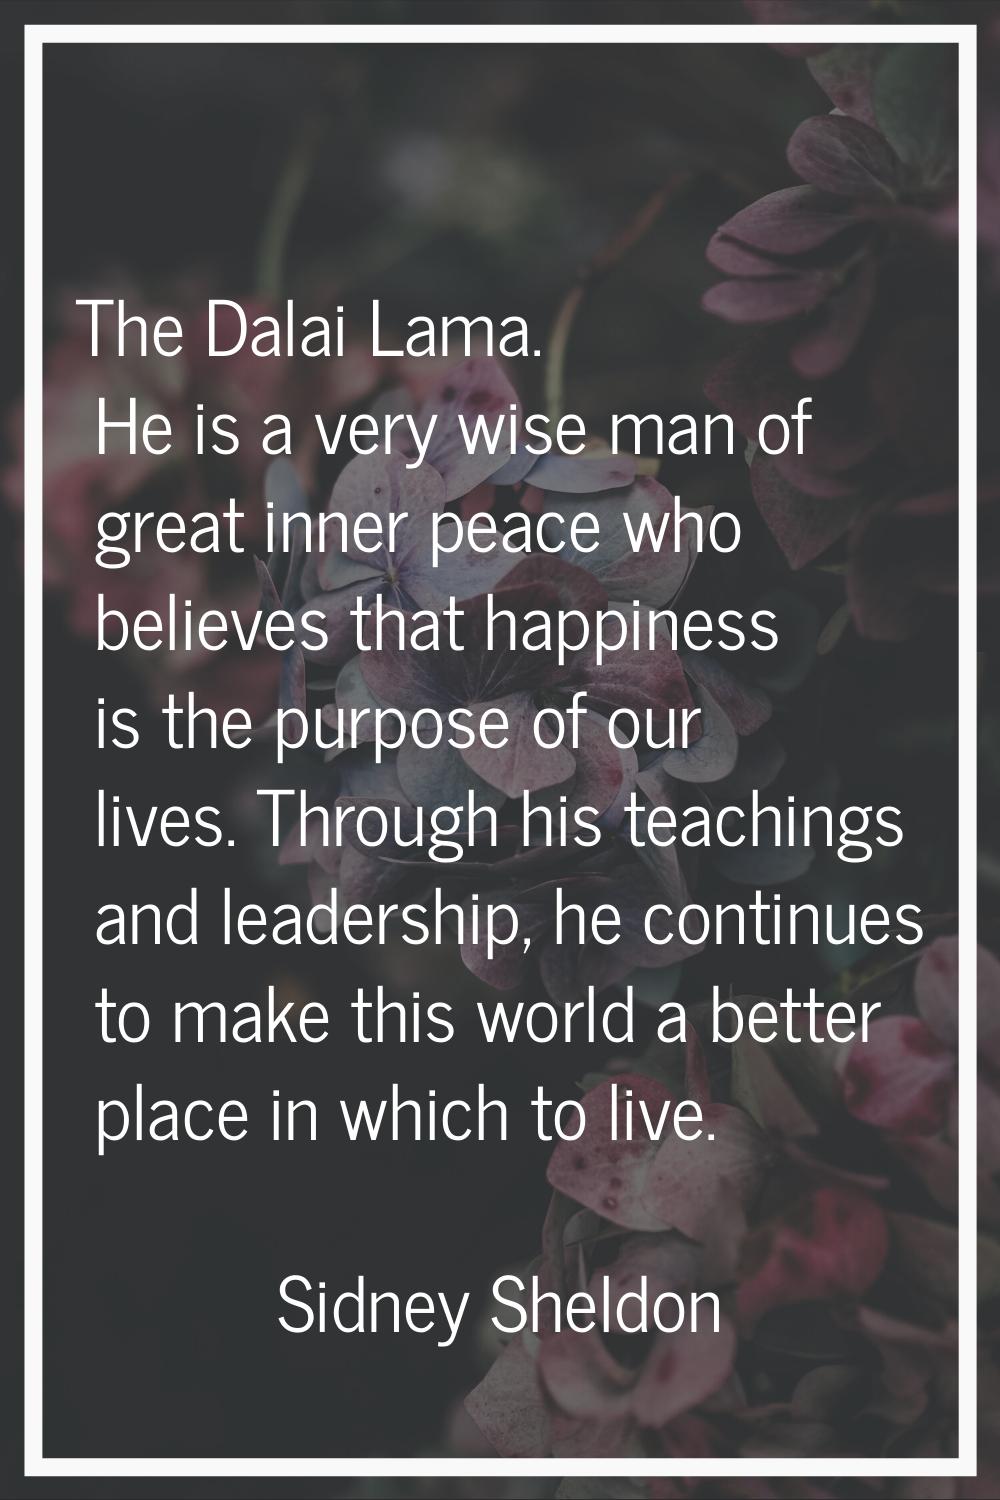 The Dalai Lama. He is a very wise man of great inner peace who believes that happiness is the purpo